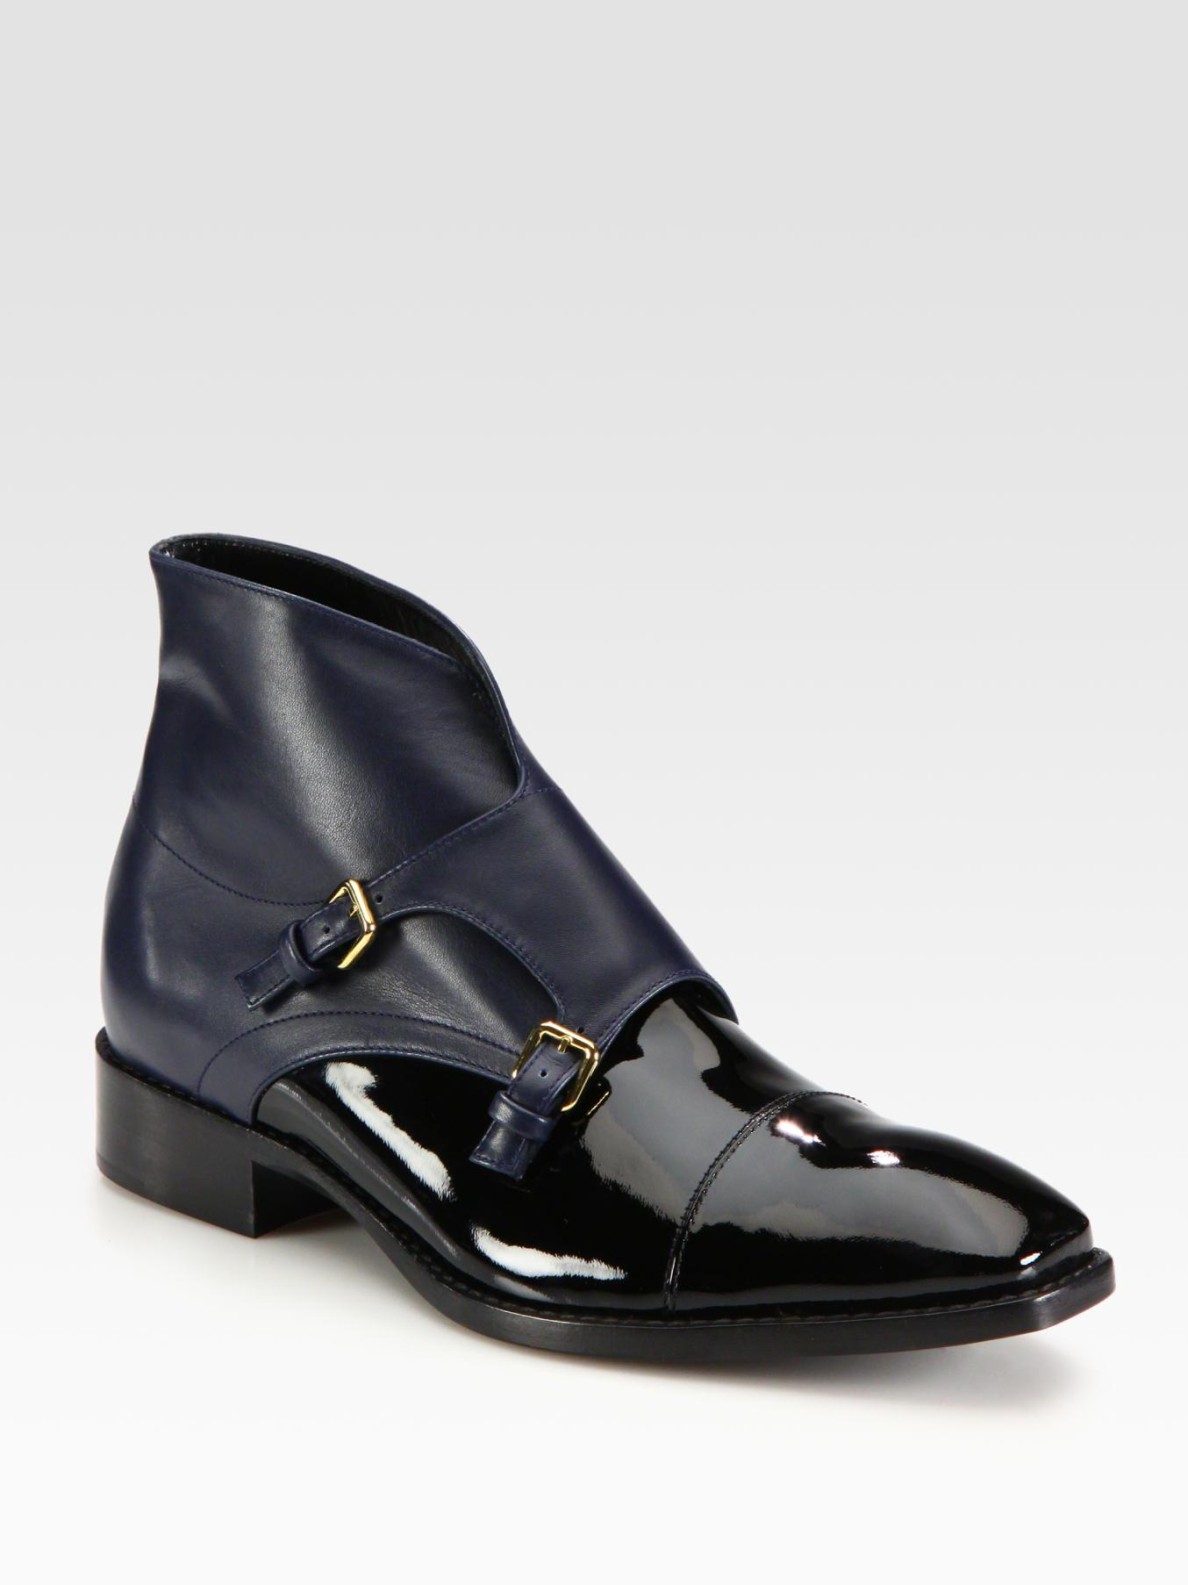 Jil sander Bicolor Patent Leather and Leather Ankle Boots in Black | Lyst